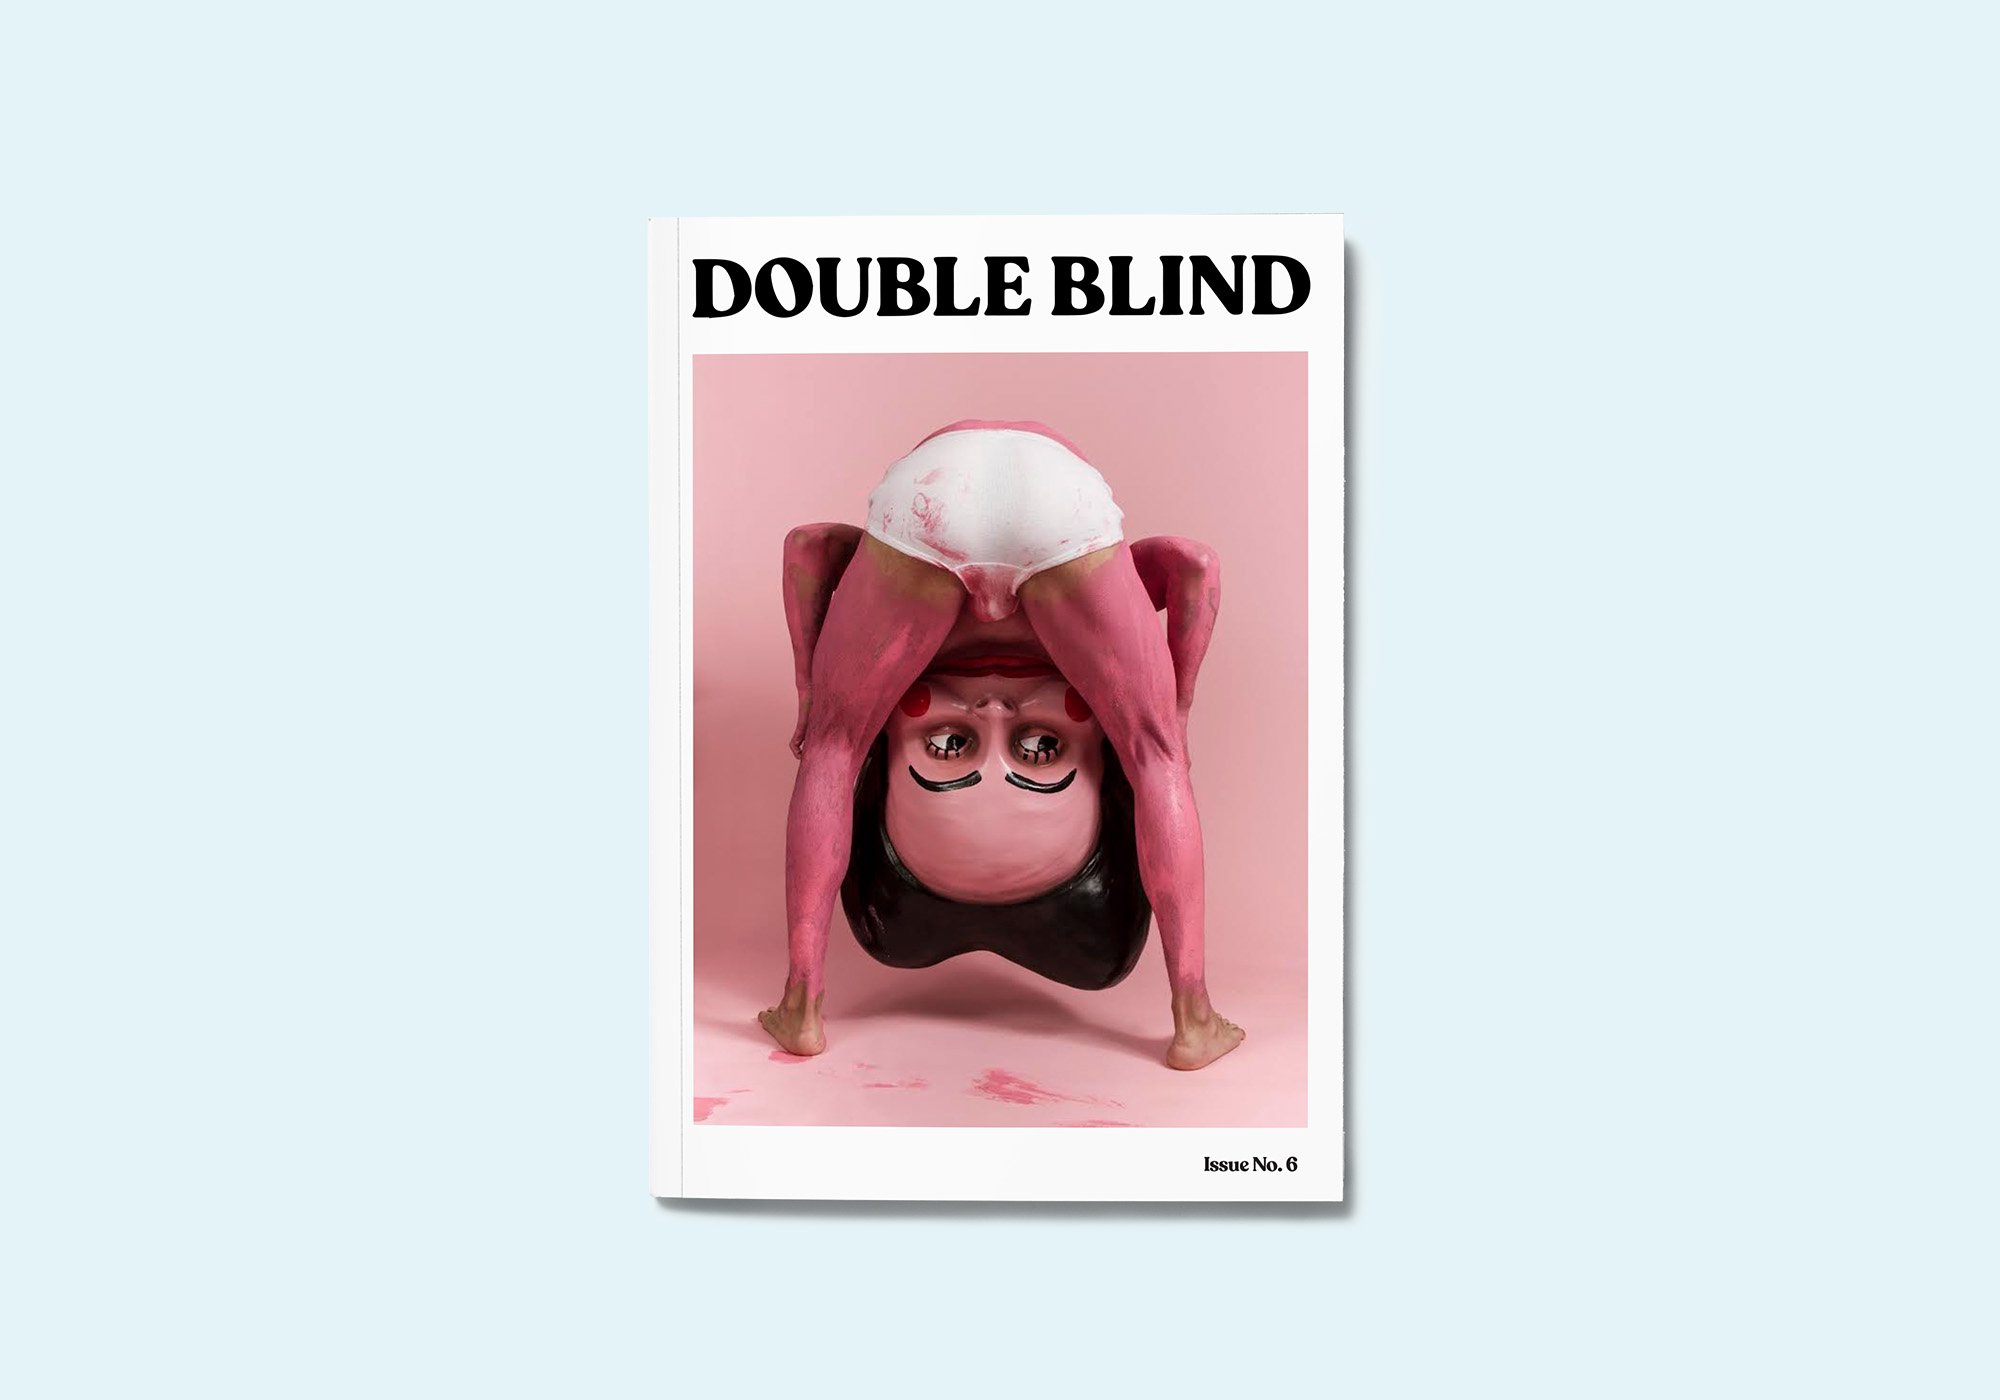 DoubleBlind__0004_Issue 6 cover - transparent.jpg